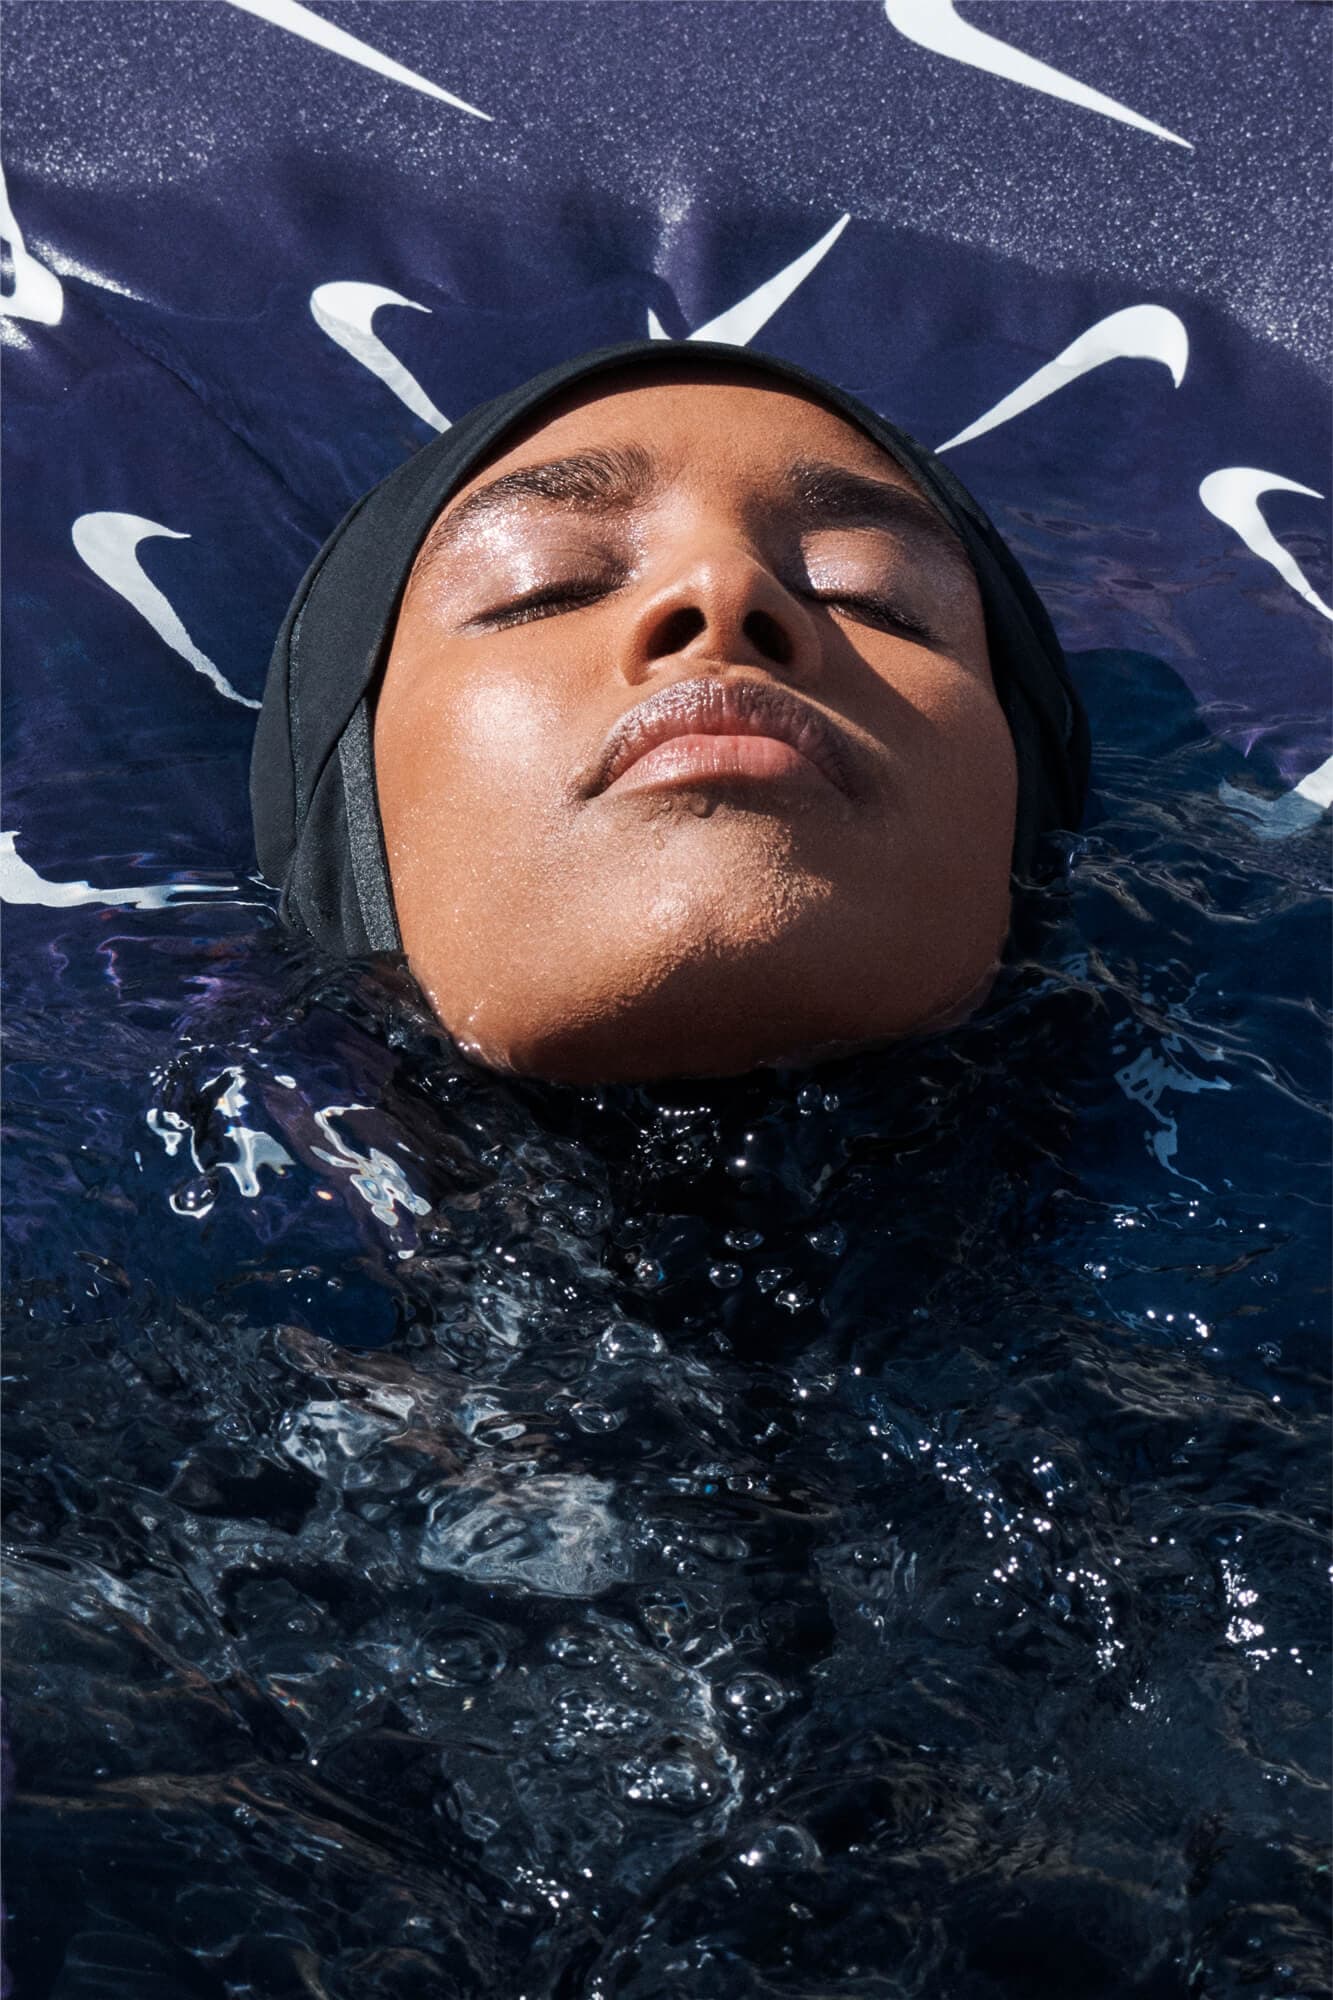 Nike, Victory Swim Campaign - Inspired by the feeling of weightlessness and freedom swimming gives women around the world